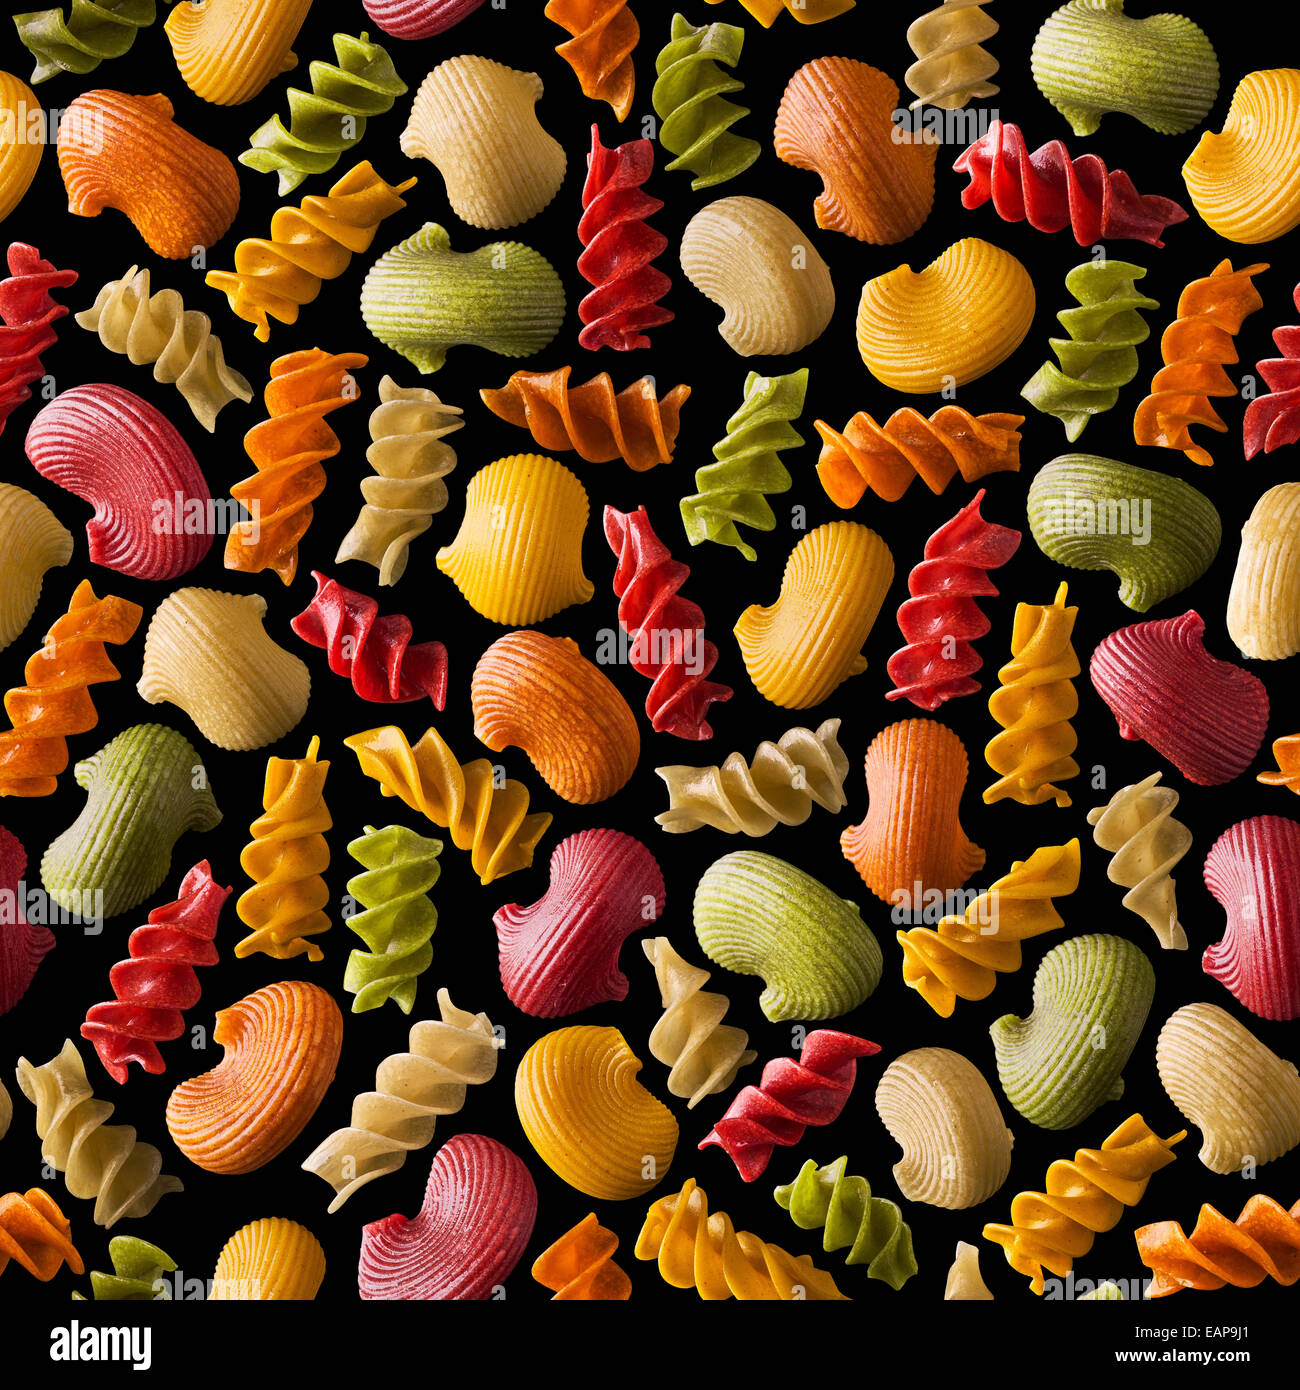 seamless texture with colorful pasta Stock Photo